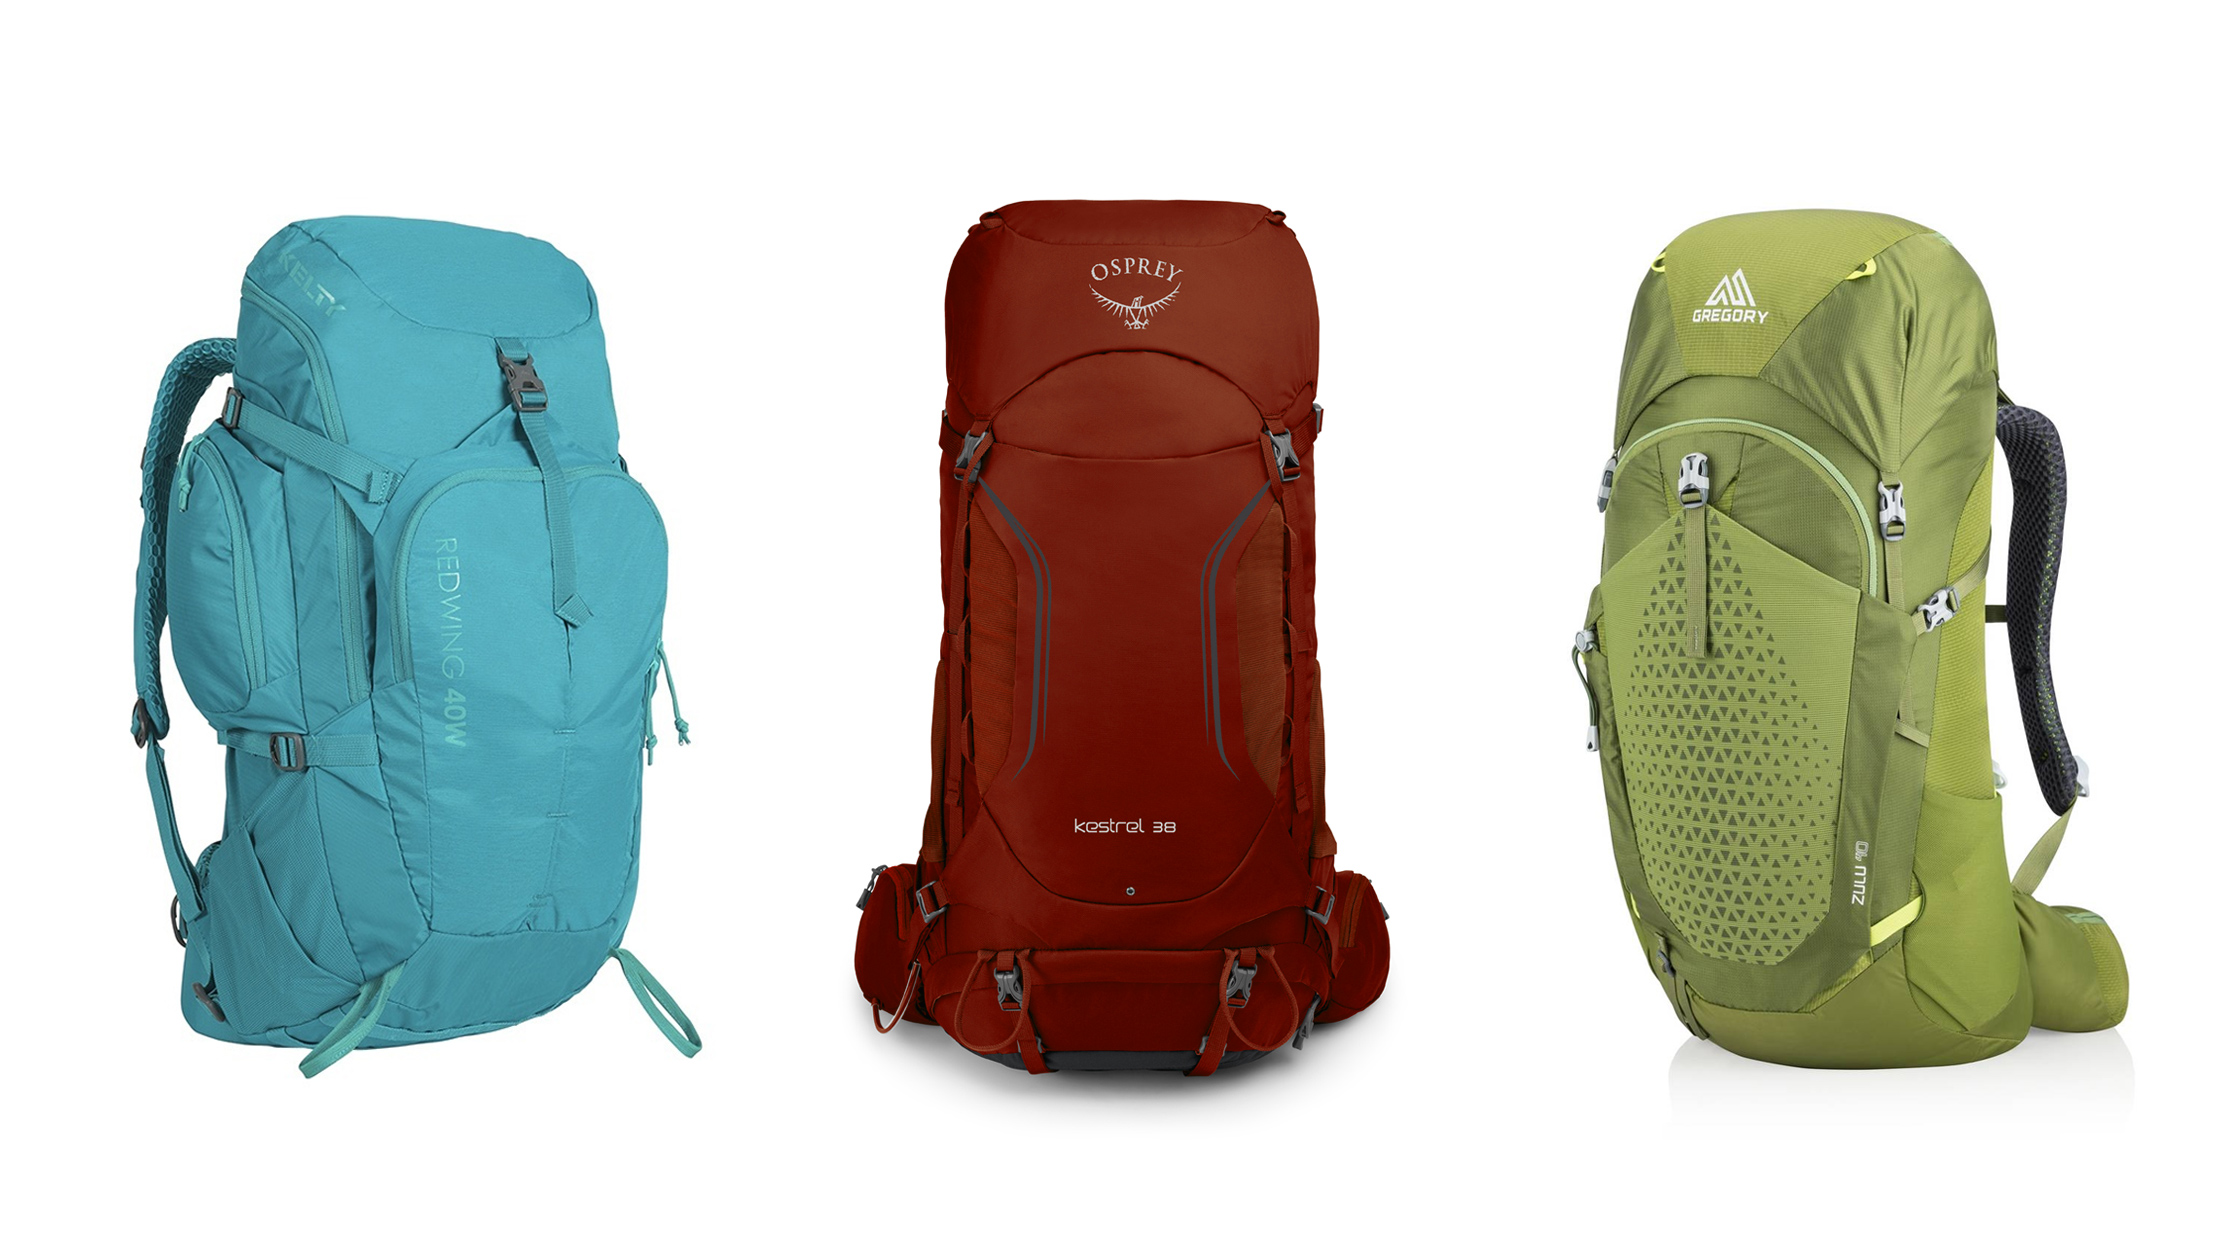 Outdoor & Hiking Travel Backpack Aesthetic